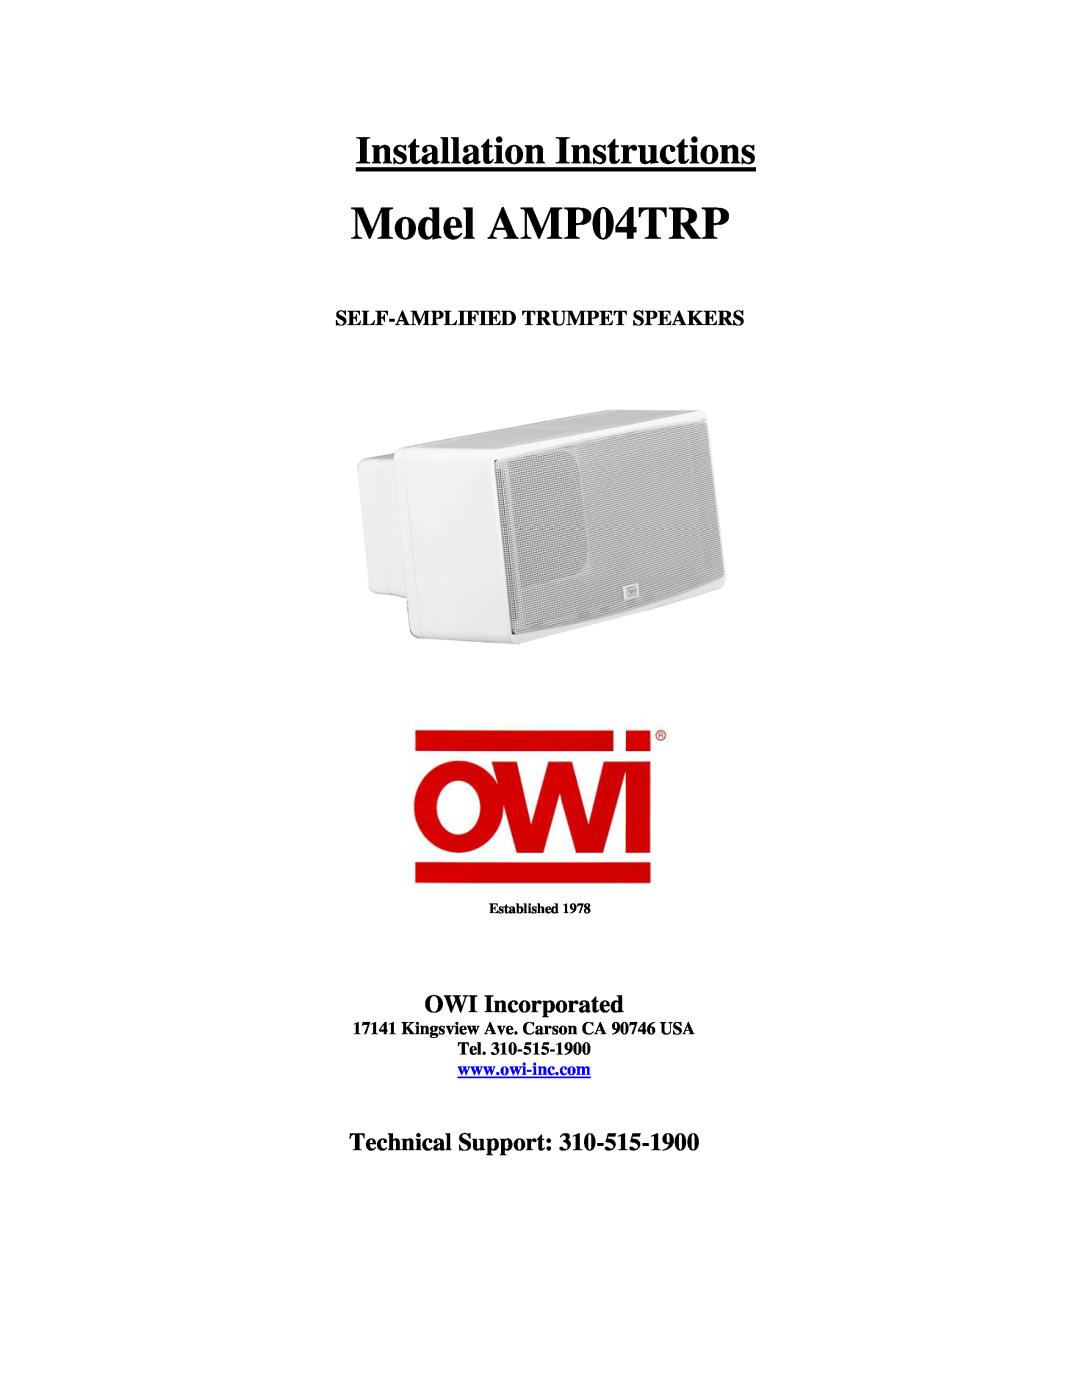 OWI AMP-04TRP installation instructions OWI Incorporated, Technical Support, Model AMP04TRP, Installation Instructions 